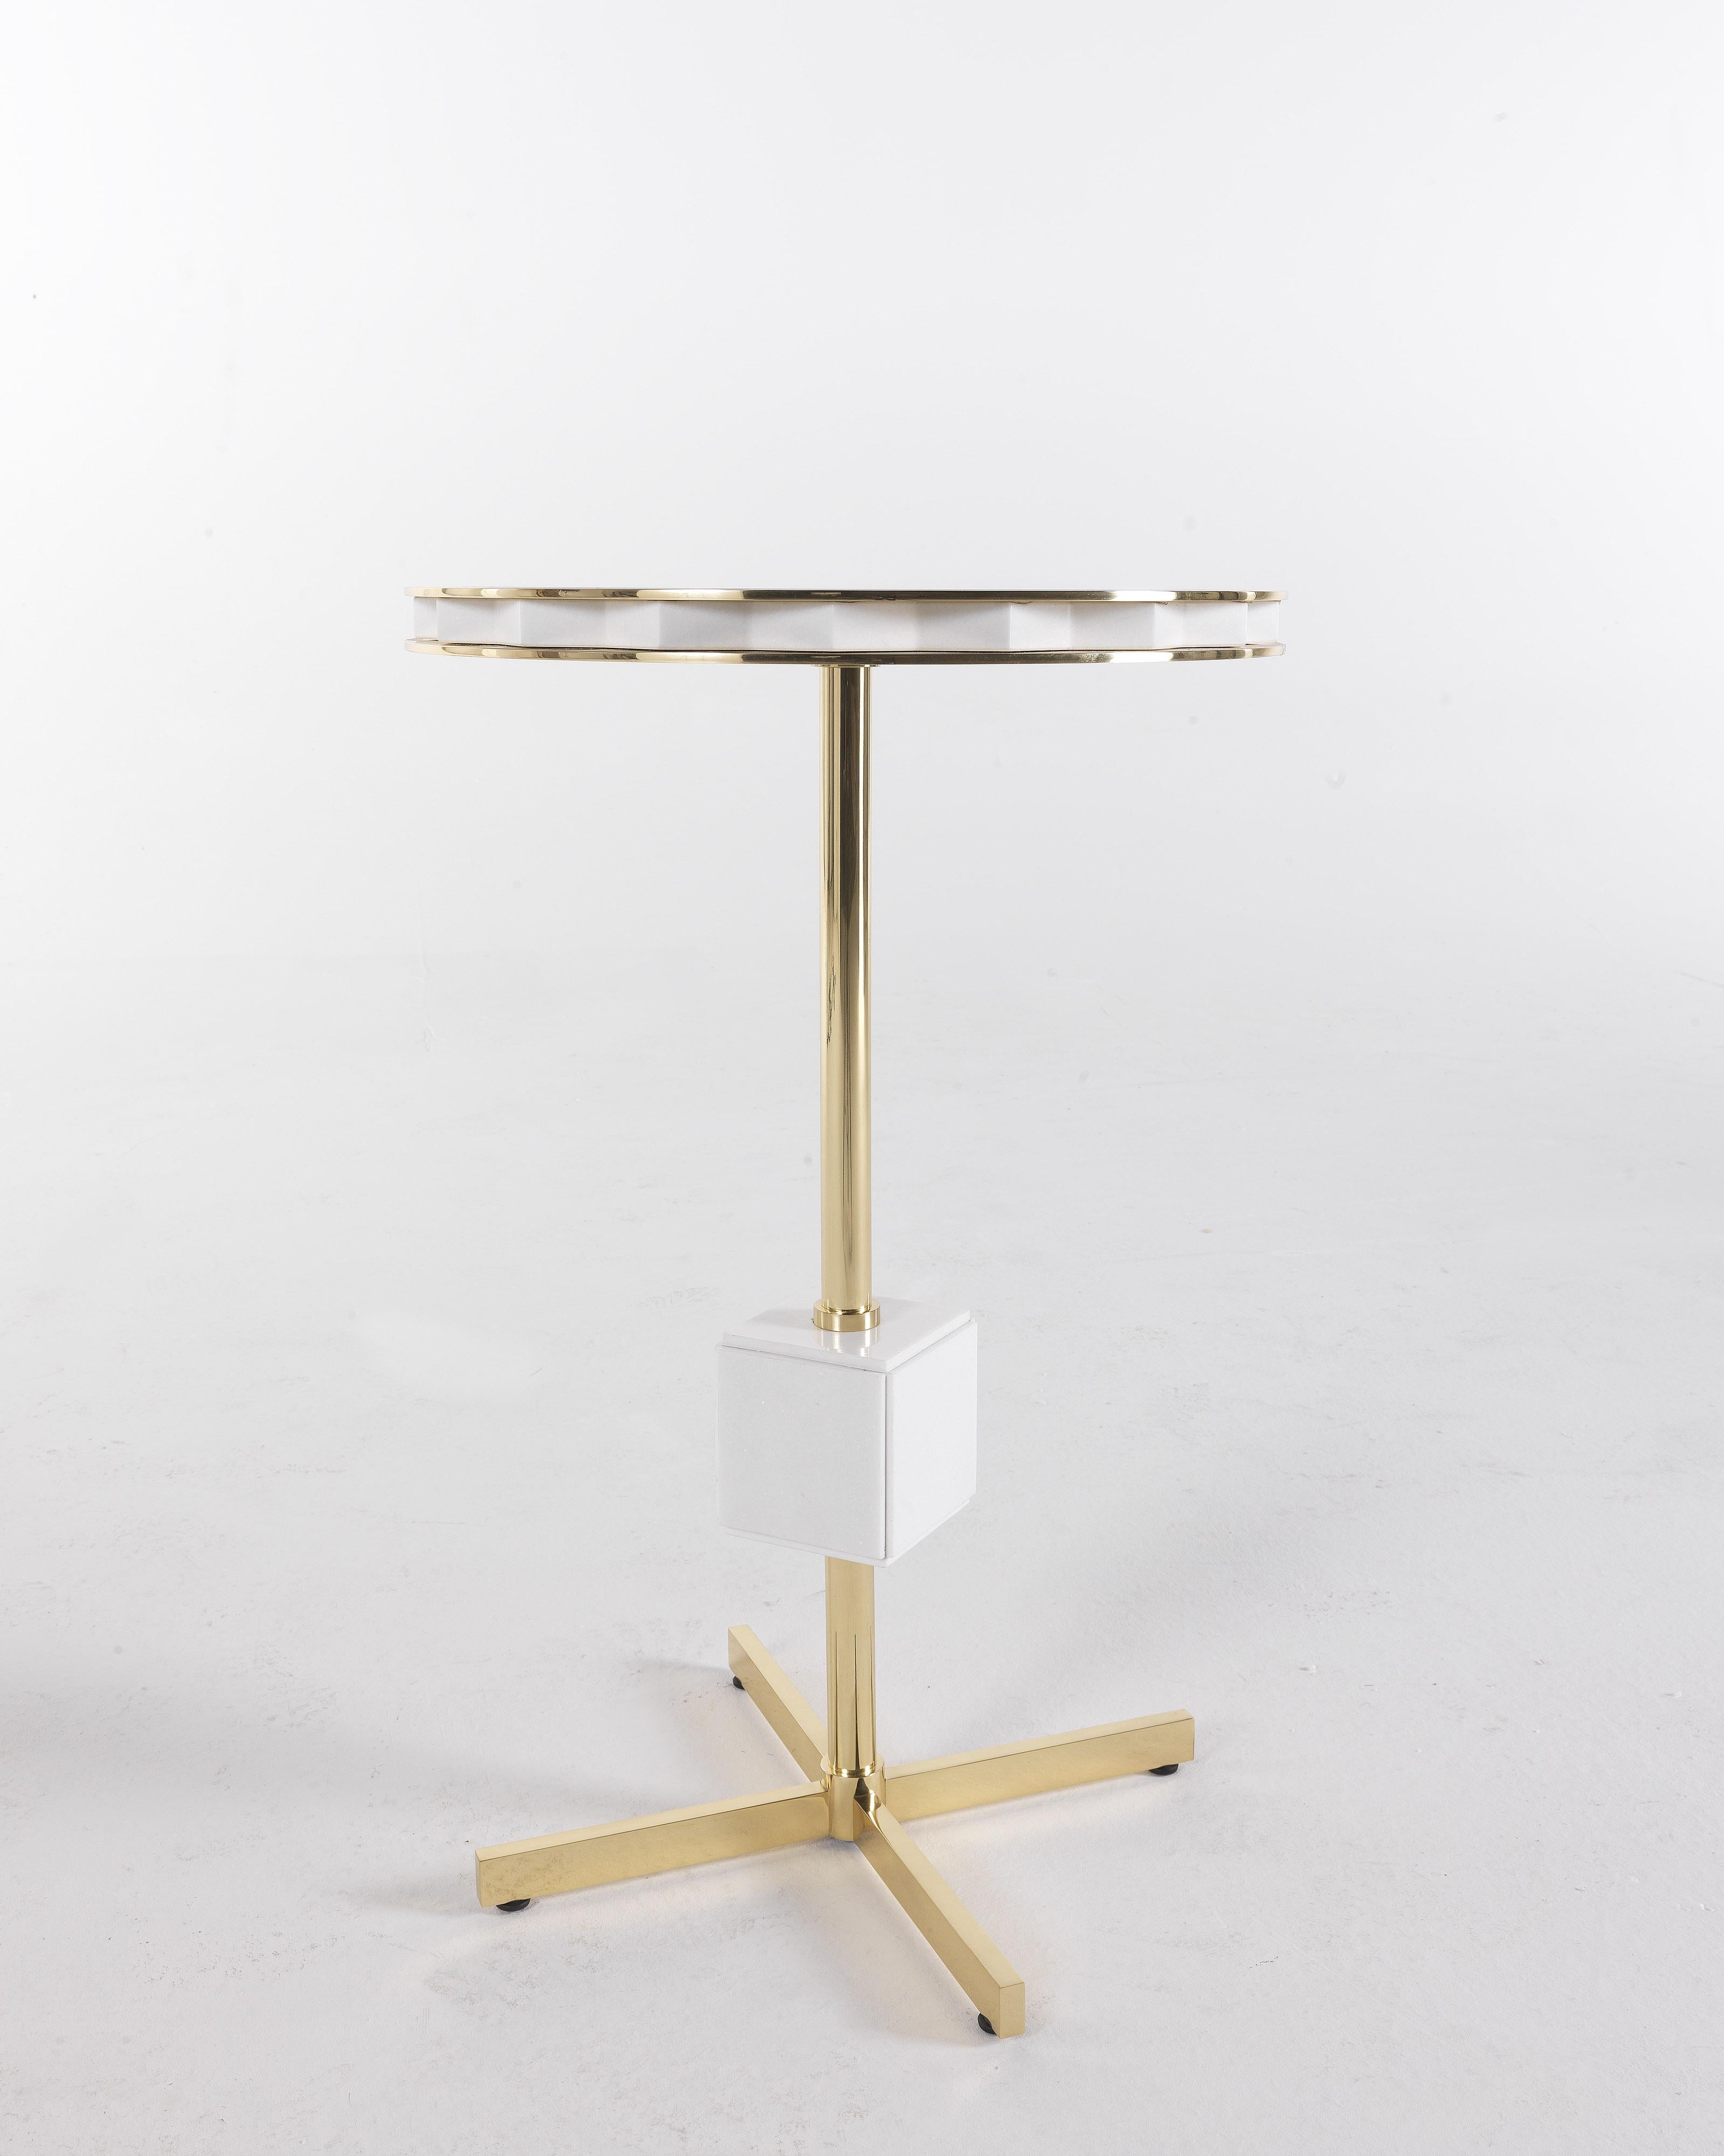 Geometric shapes in Decò style for the Emily coffee table, characterized by a brass structure with a glossy finish, a decorative cube and marble top. A piece of furniture with an eclectic charm, suitable for environments in a classic or contemporary